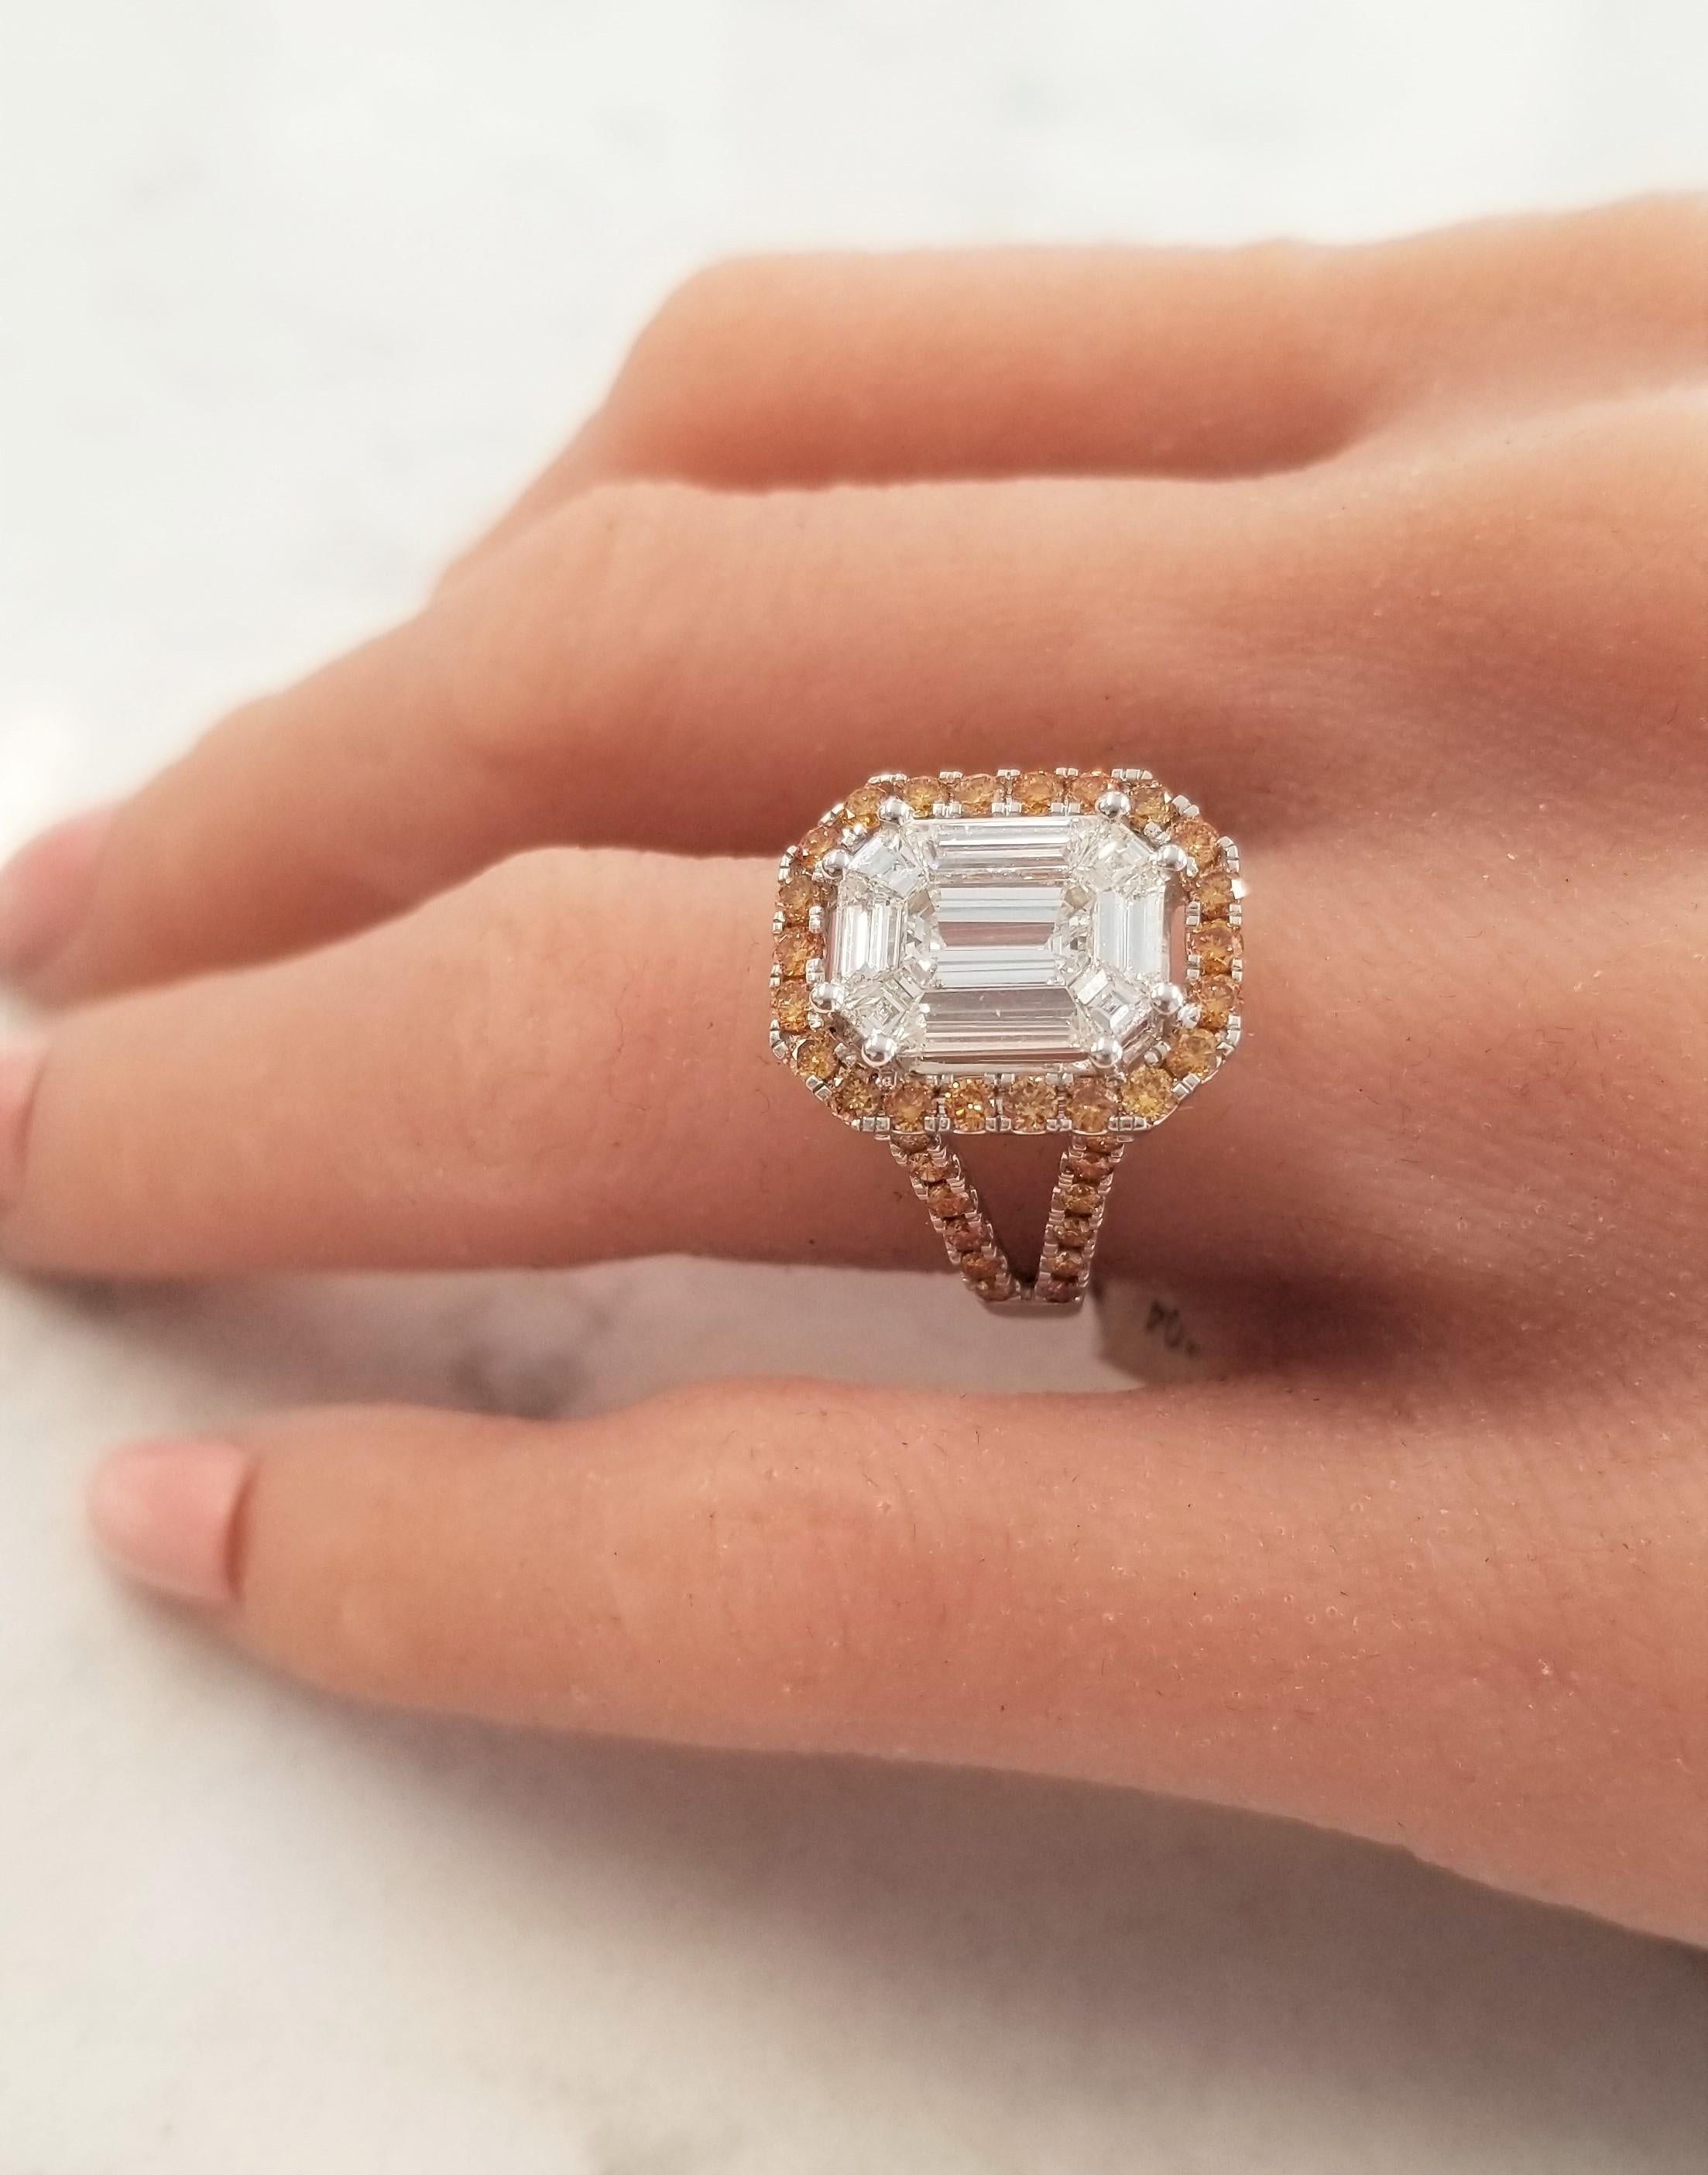 This is an illusion set ring. An emerald cut diamond is double prong set in the center, 9 step-cut trapazoid diamonds surround the emerald cut totaling for 3.70 carats. Together, the white diamonds measure 12.26x9.03mm. 0.30 carats of round